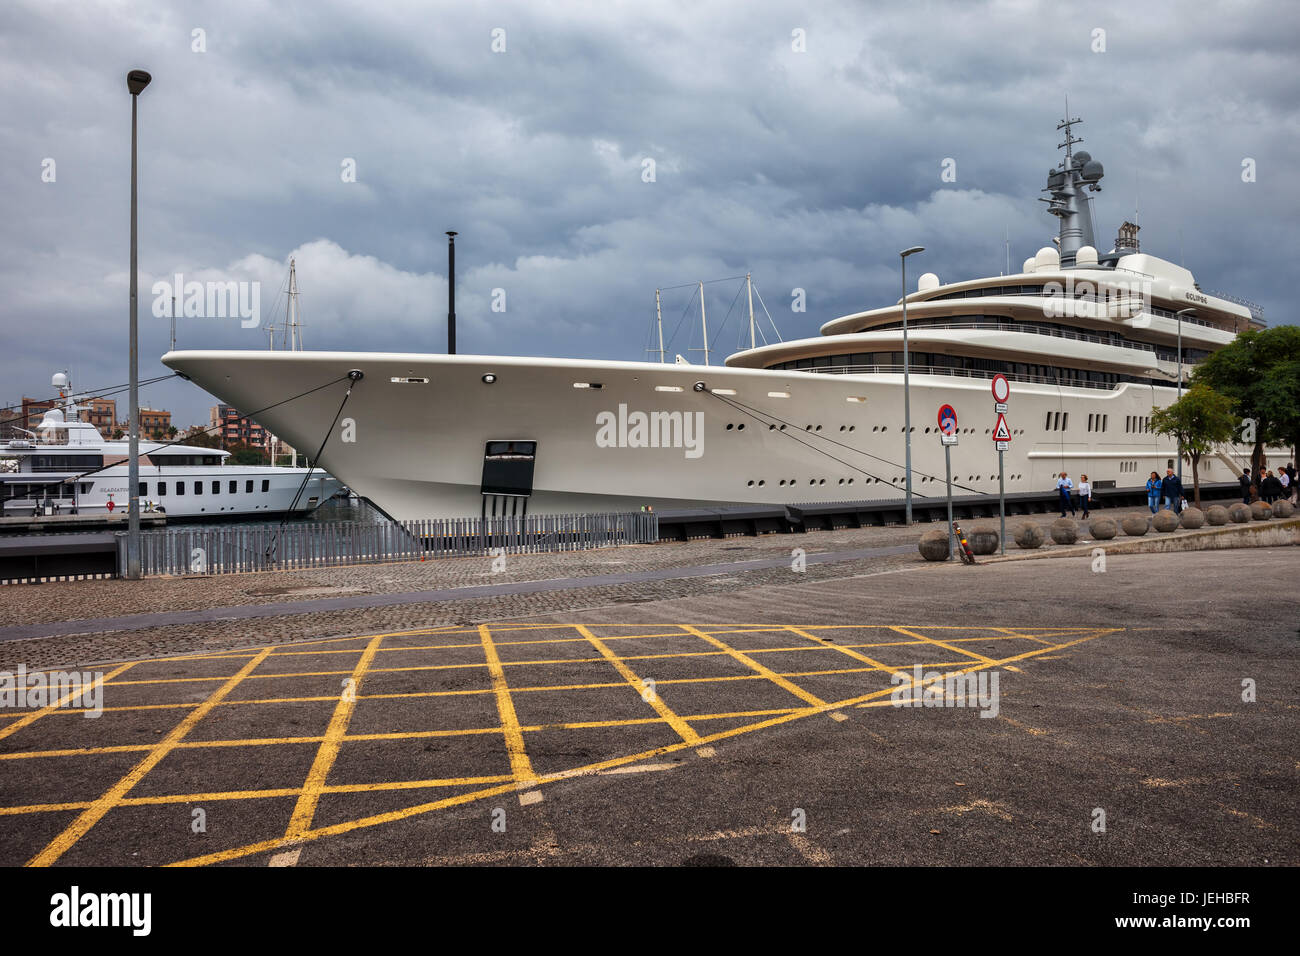 Eclipse luxury super yacht moored at Barcelona port, Spain Stock Photo